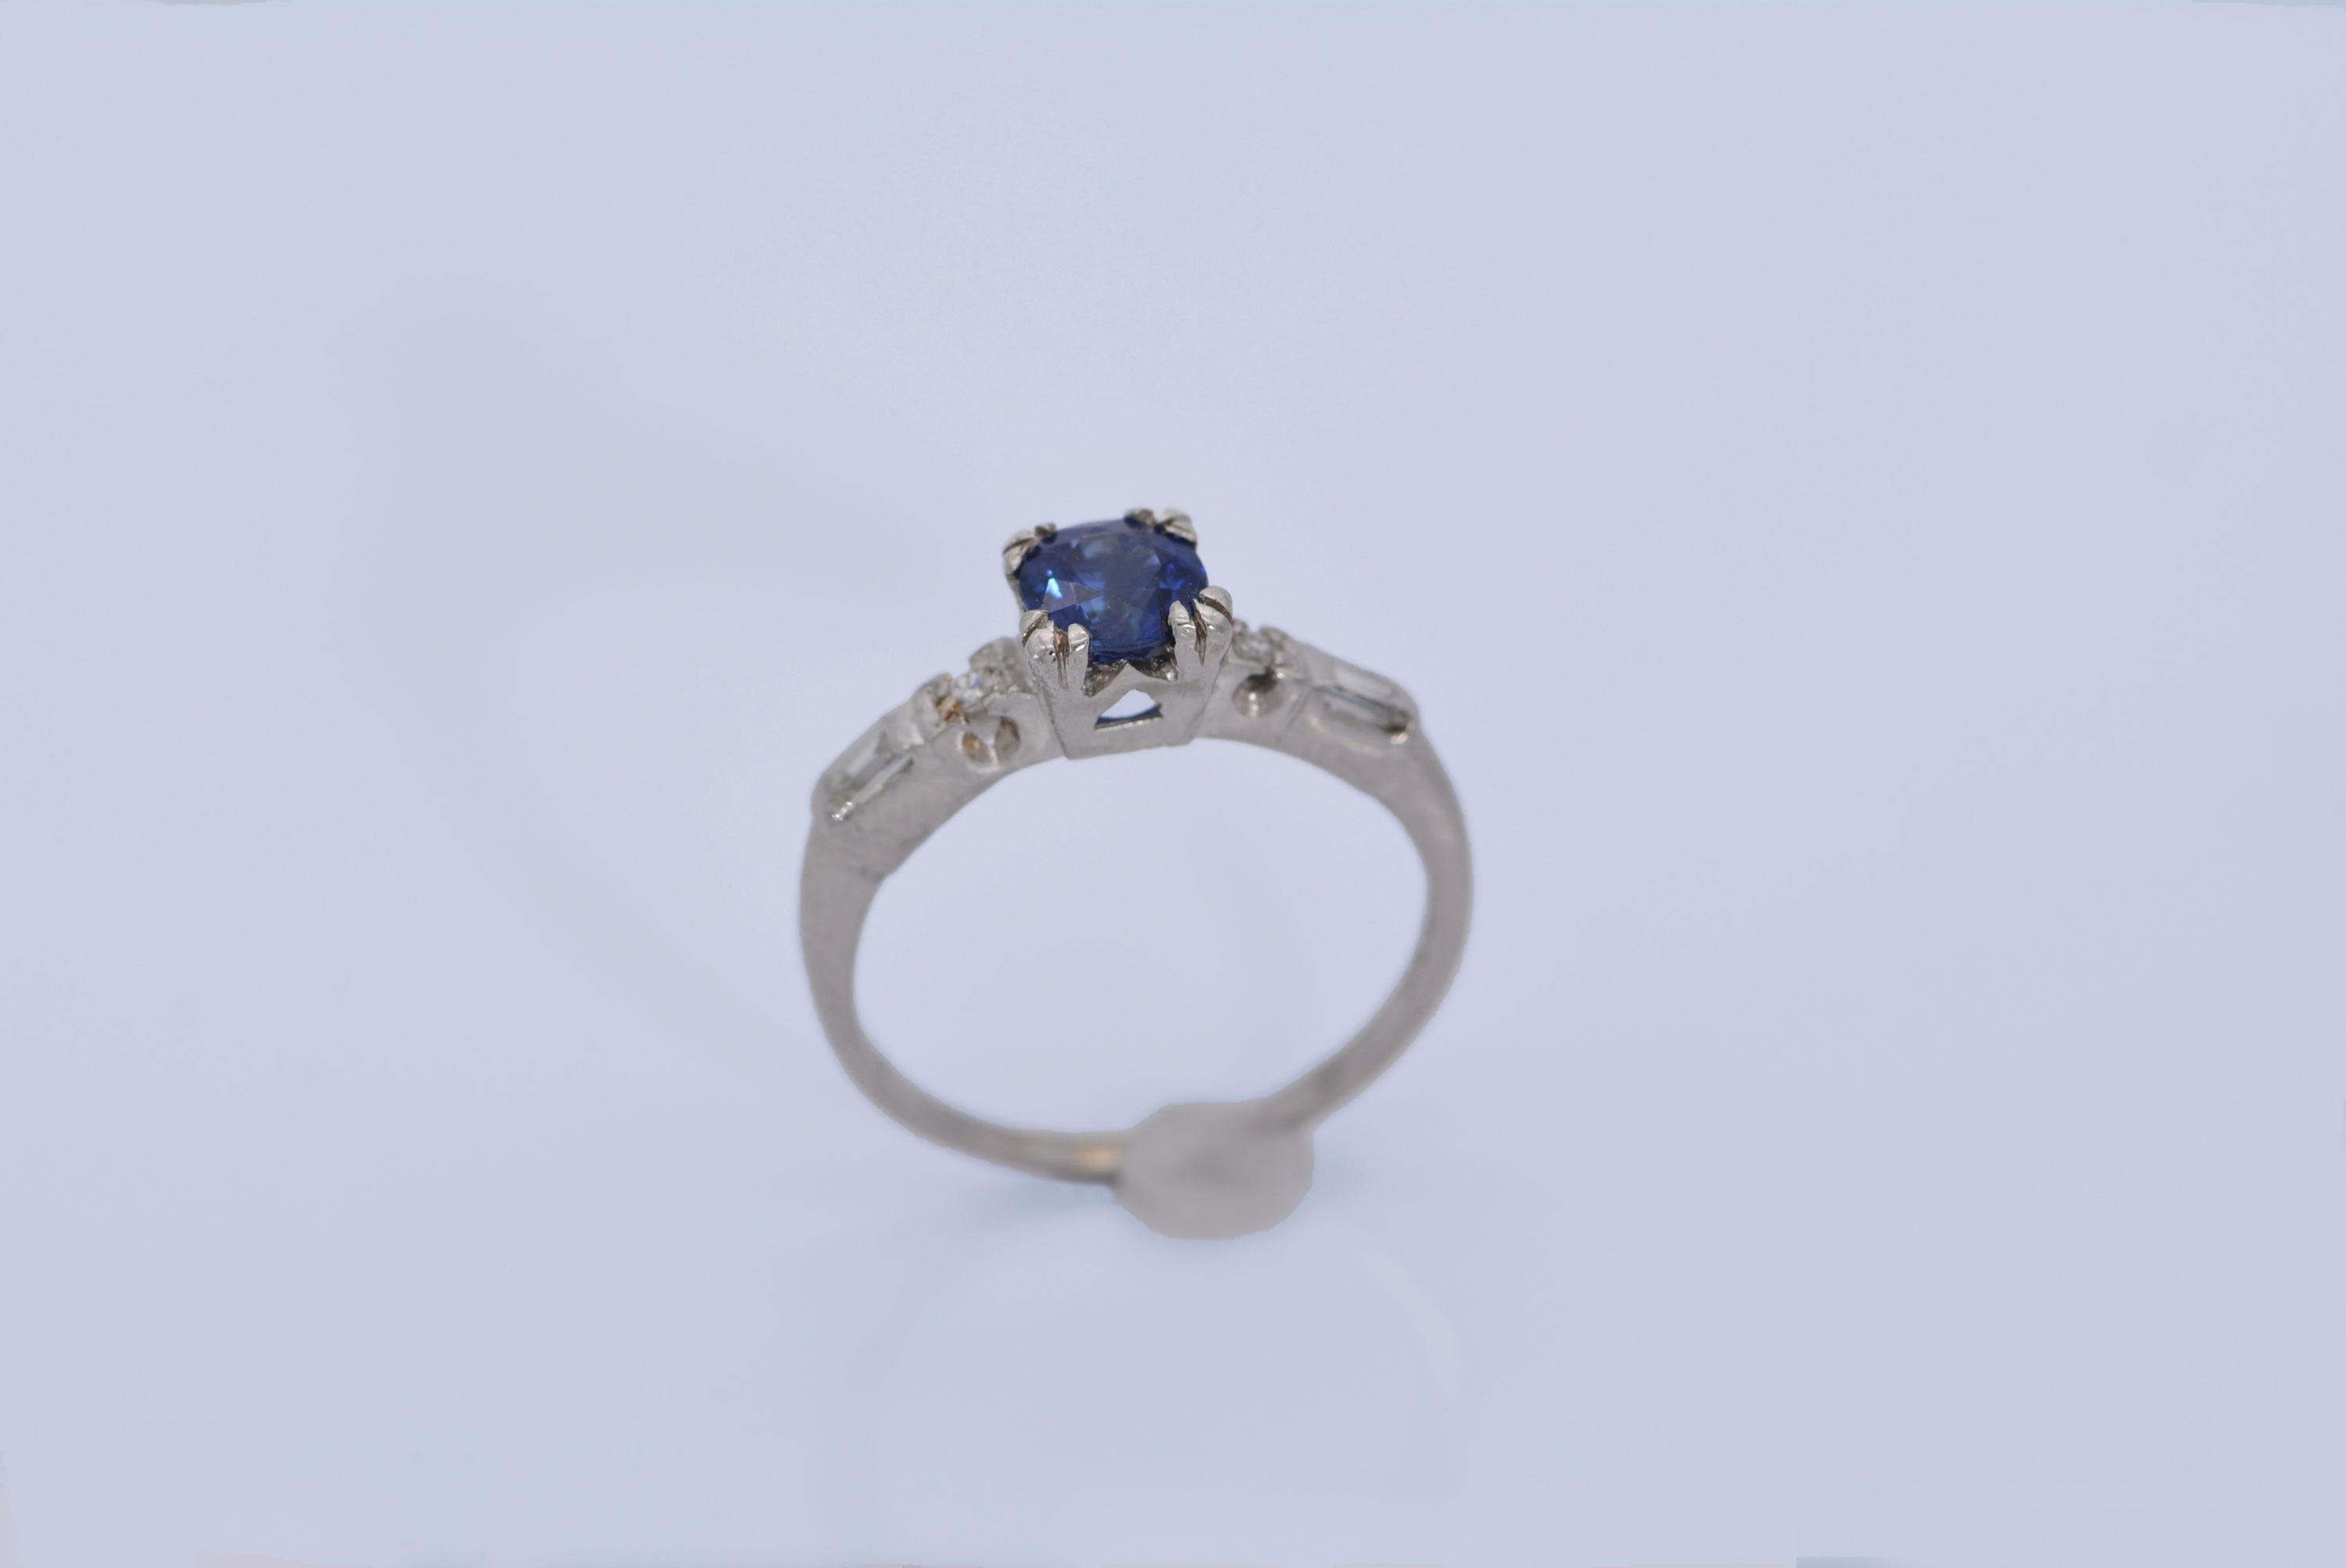 GIA Certified 0.70 Carat Madagascar Sapphire and Diamond Platinum Ring In Excellent Condition For Sale In Aurora, Ontario